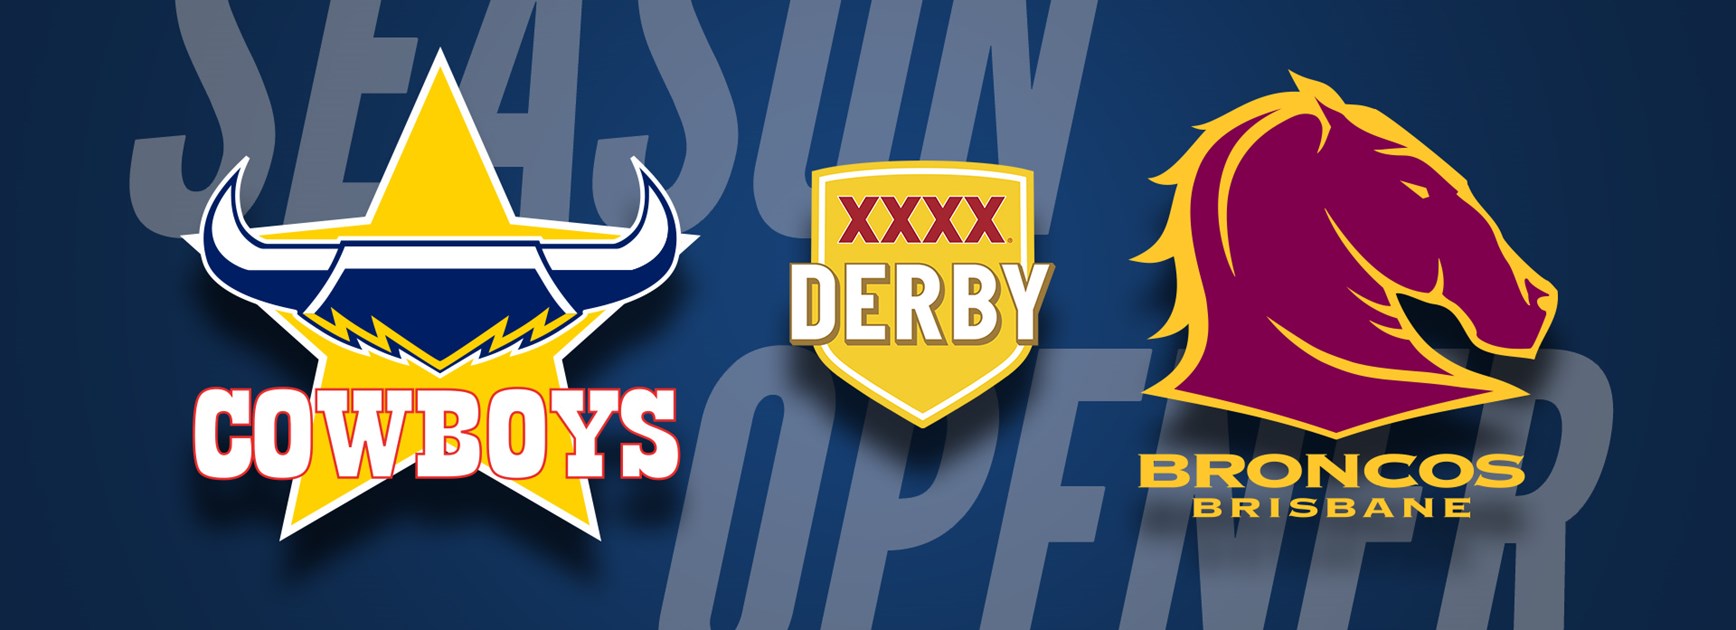 RECONFIRMED: XXXX Derby to go ahead